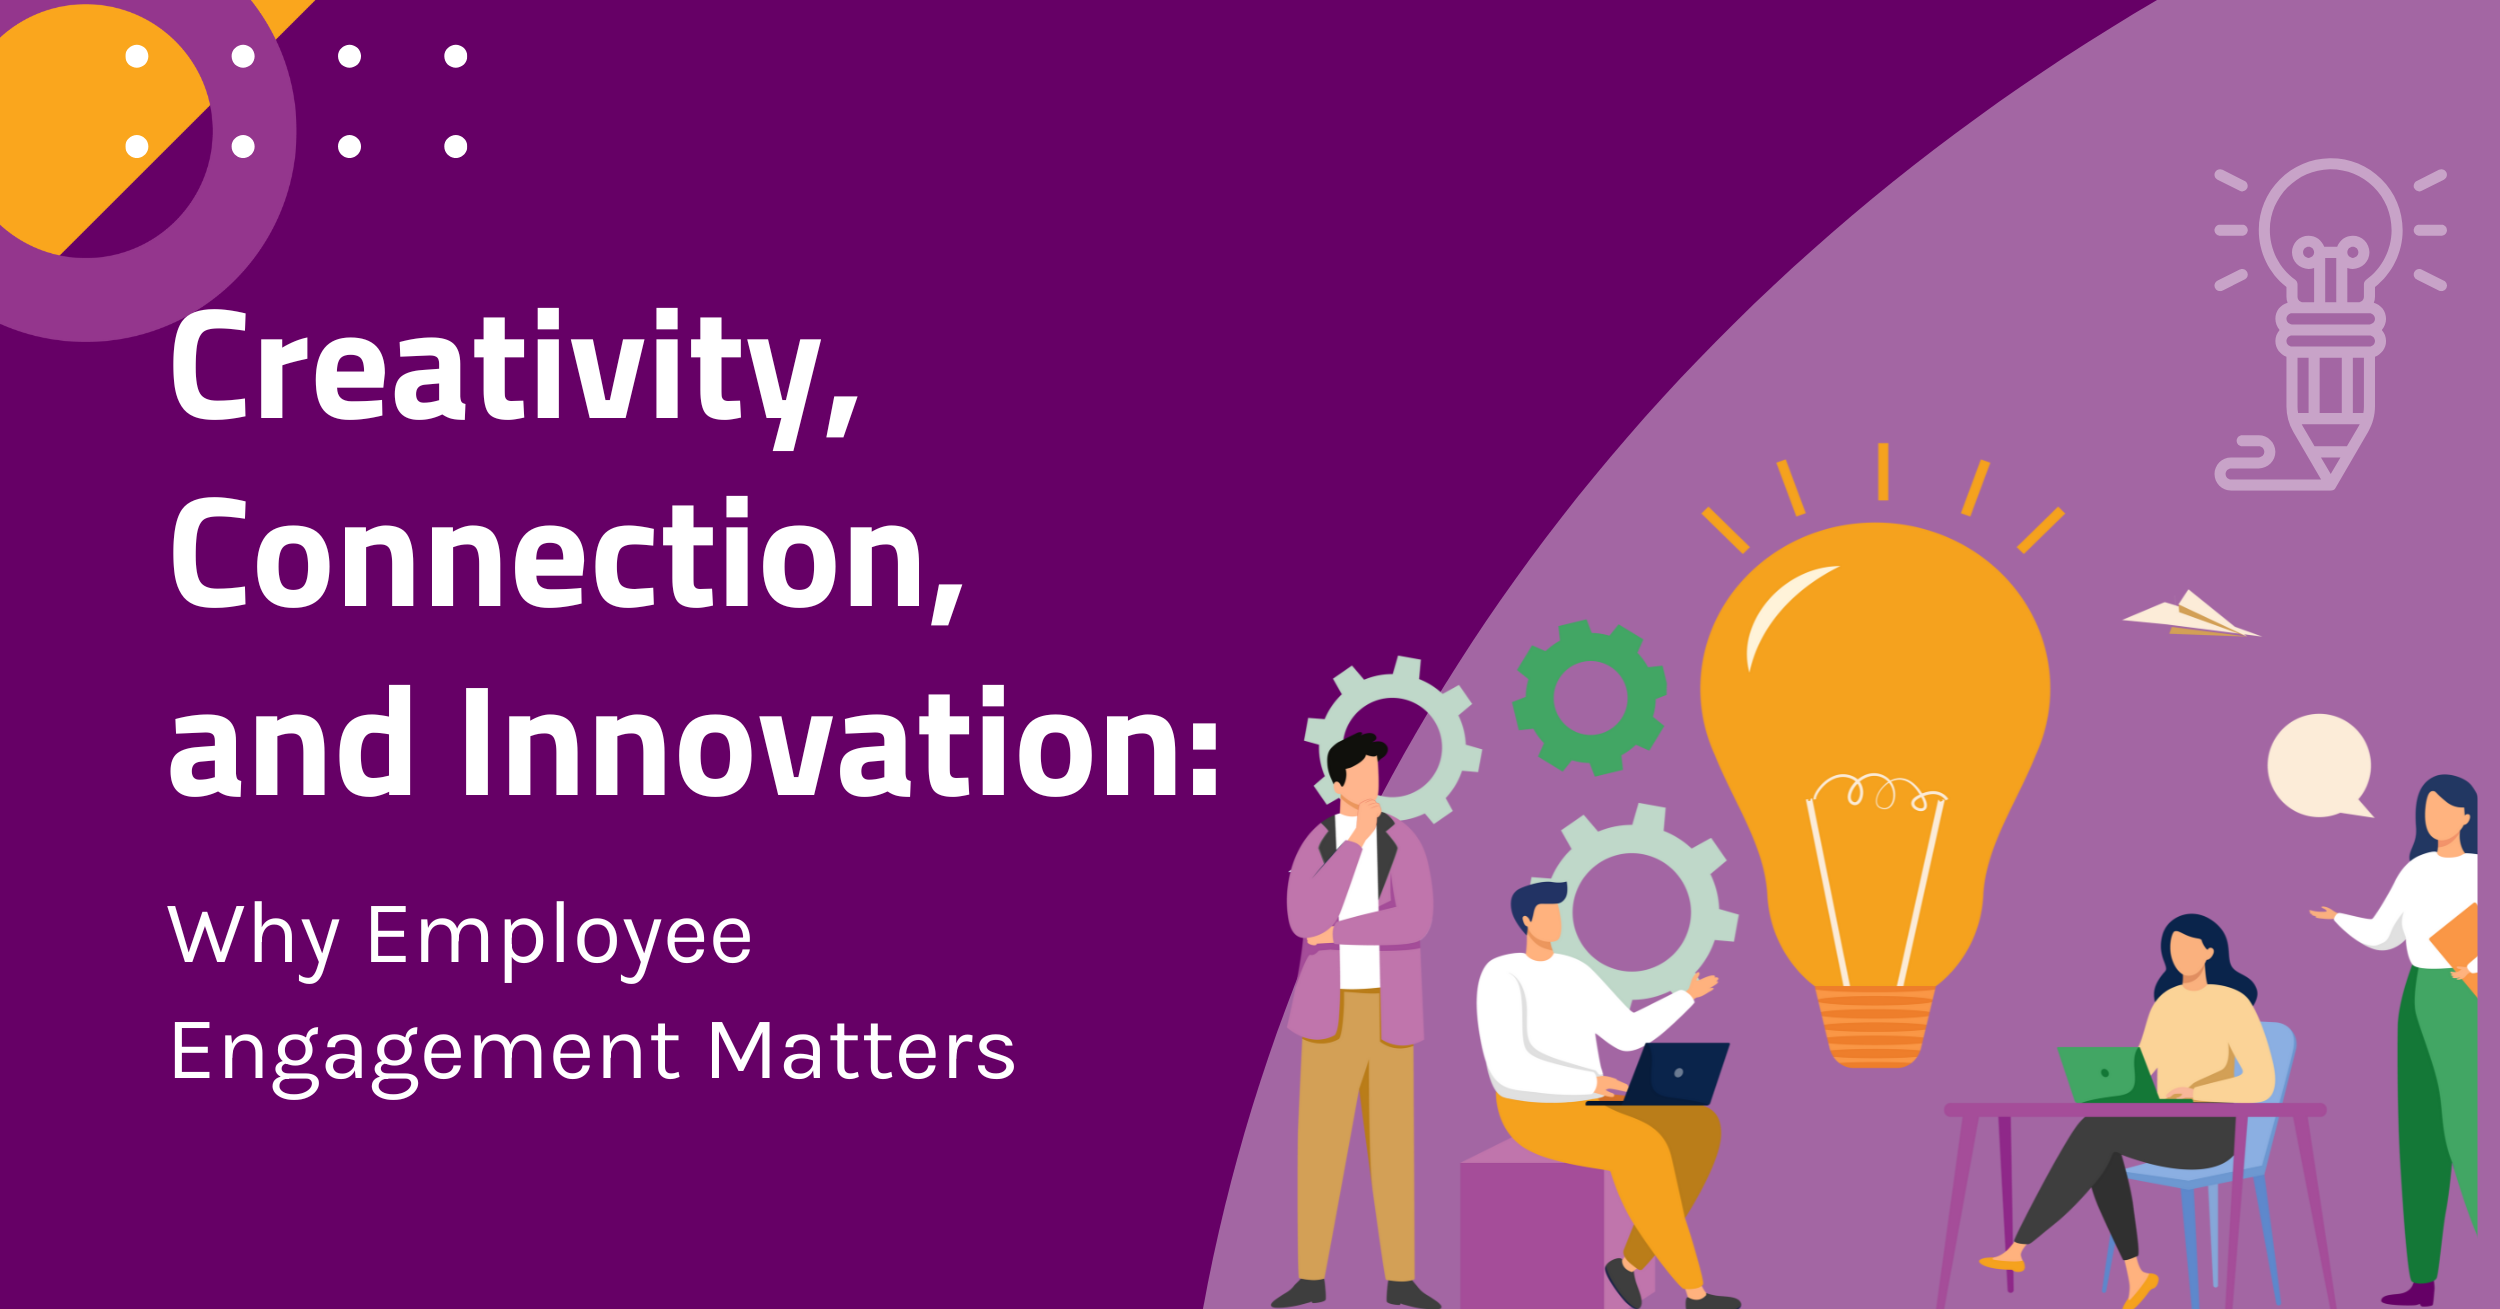 Creativity, Connection, and Innovation: Why Employee Engagement Matters